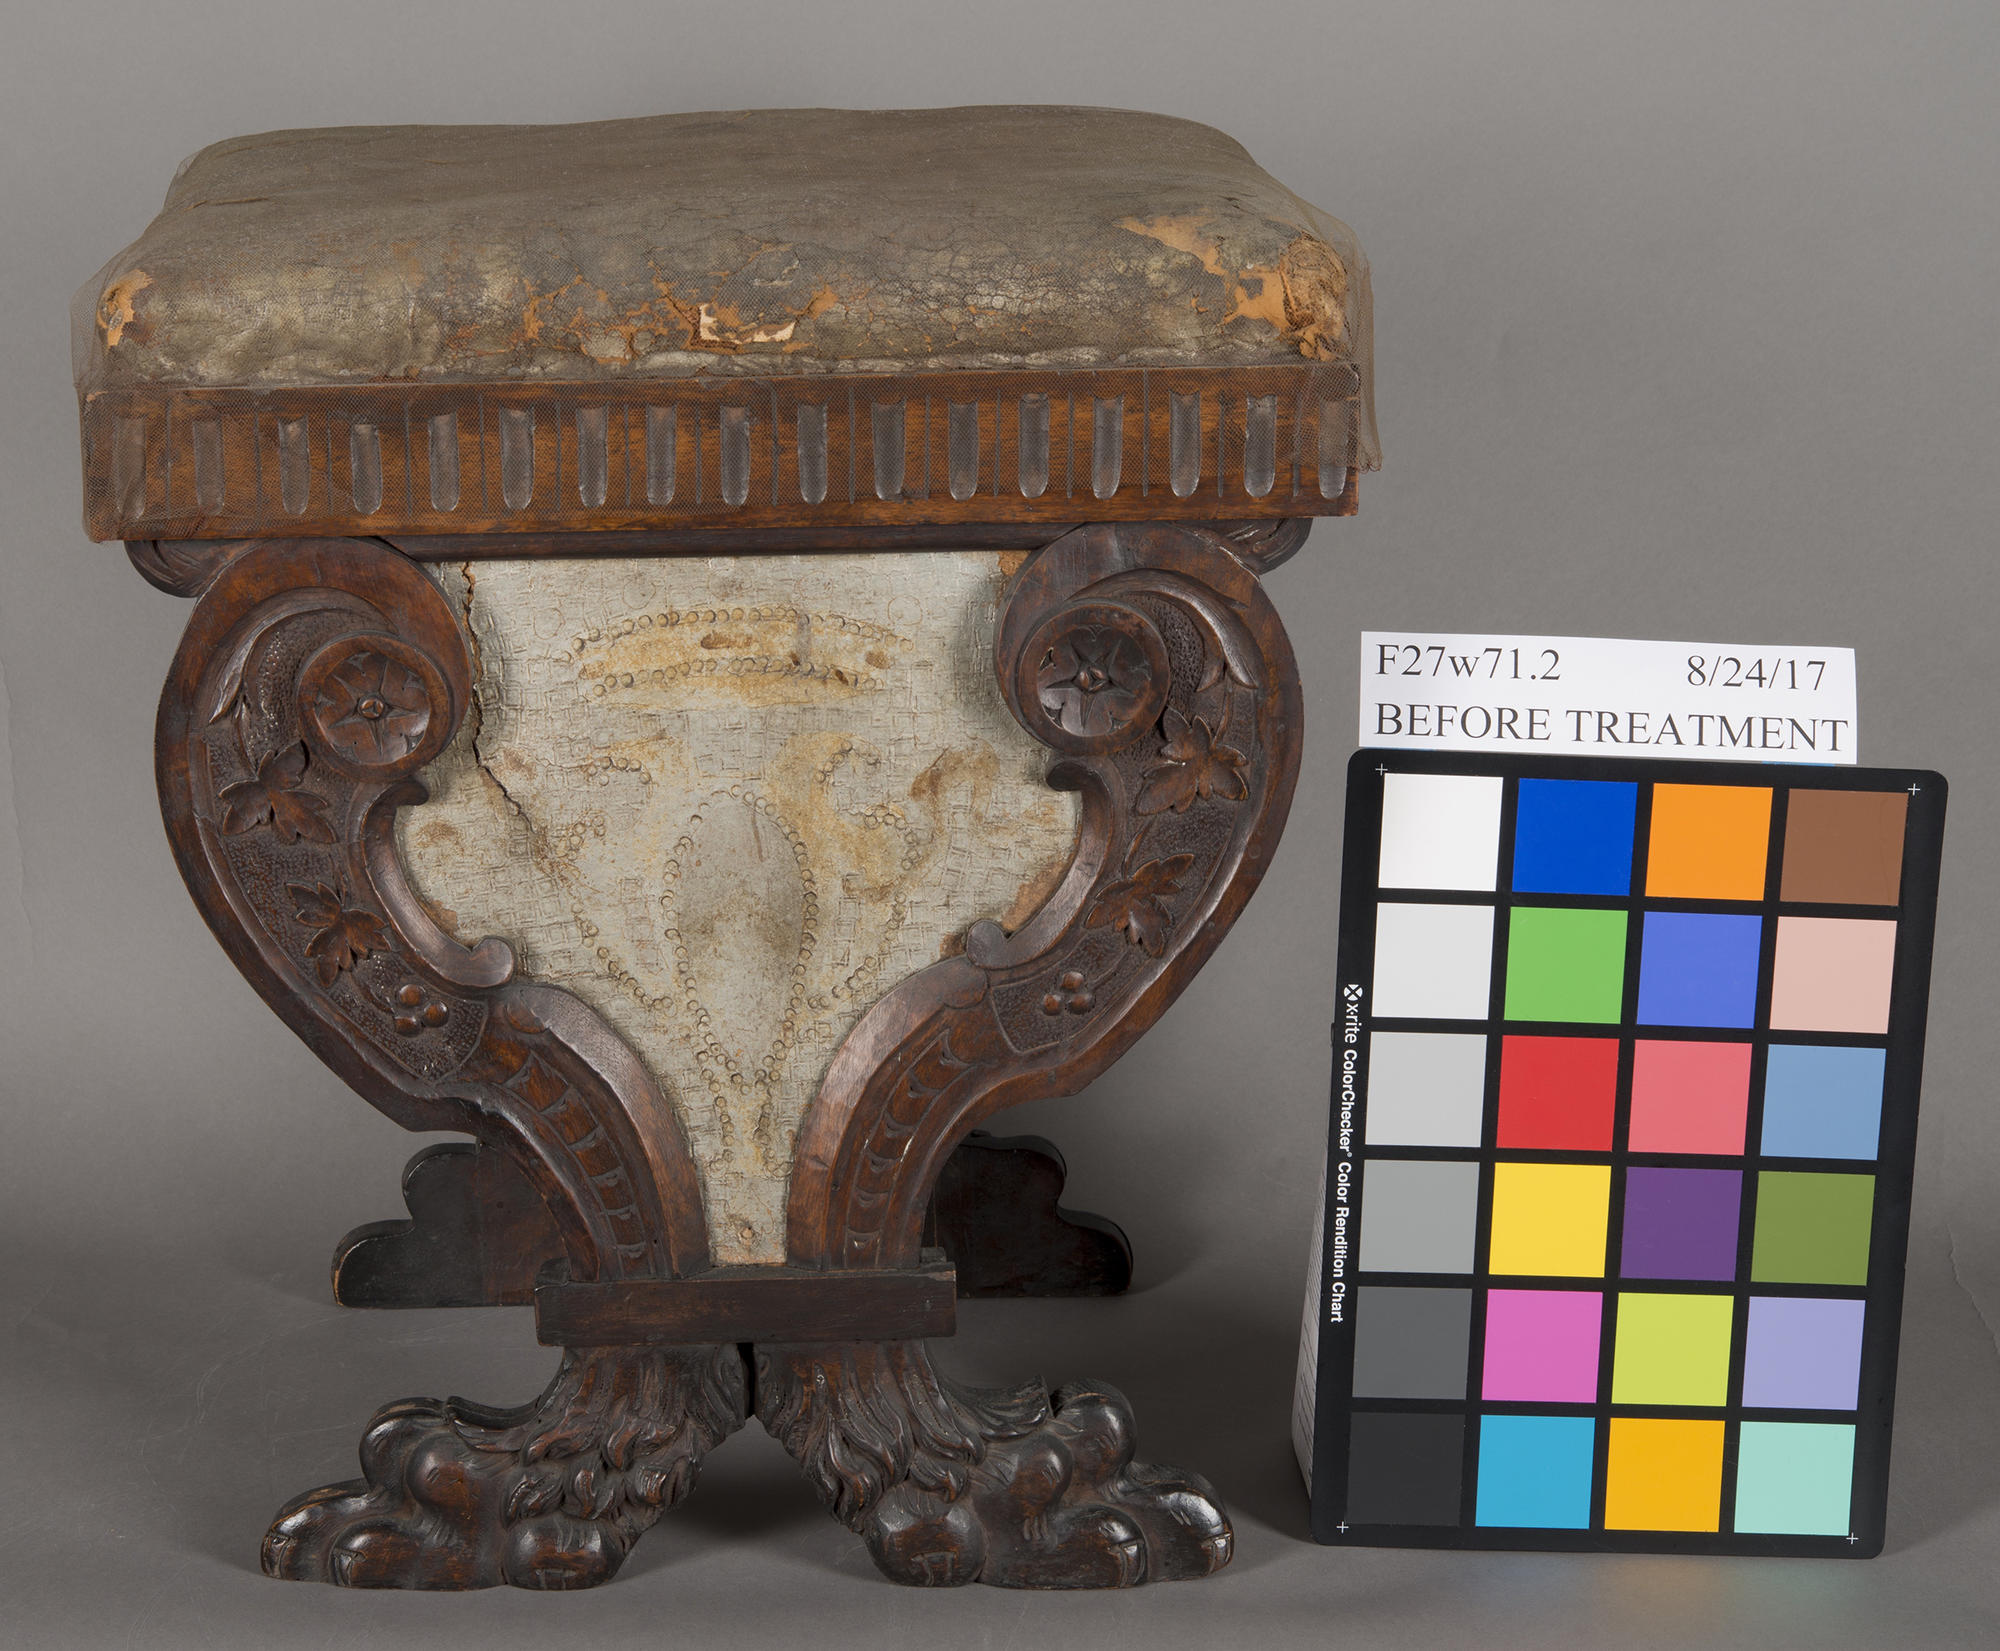 One of the stools, F27w71.2, before conservation